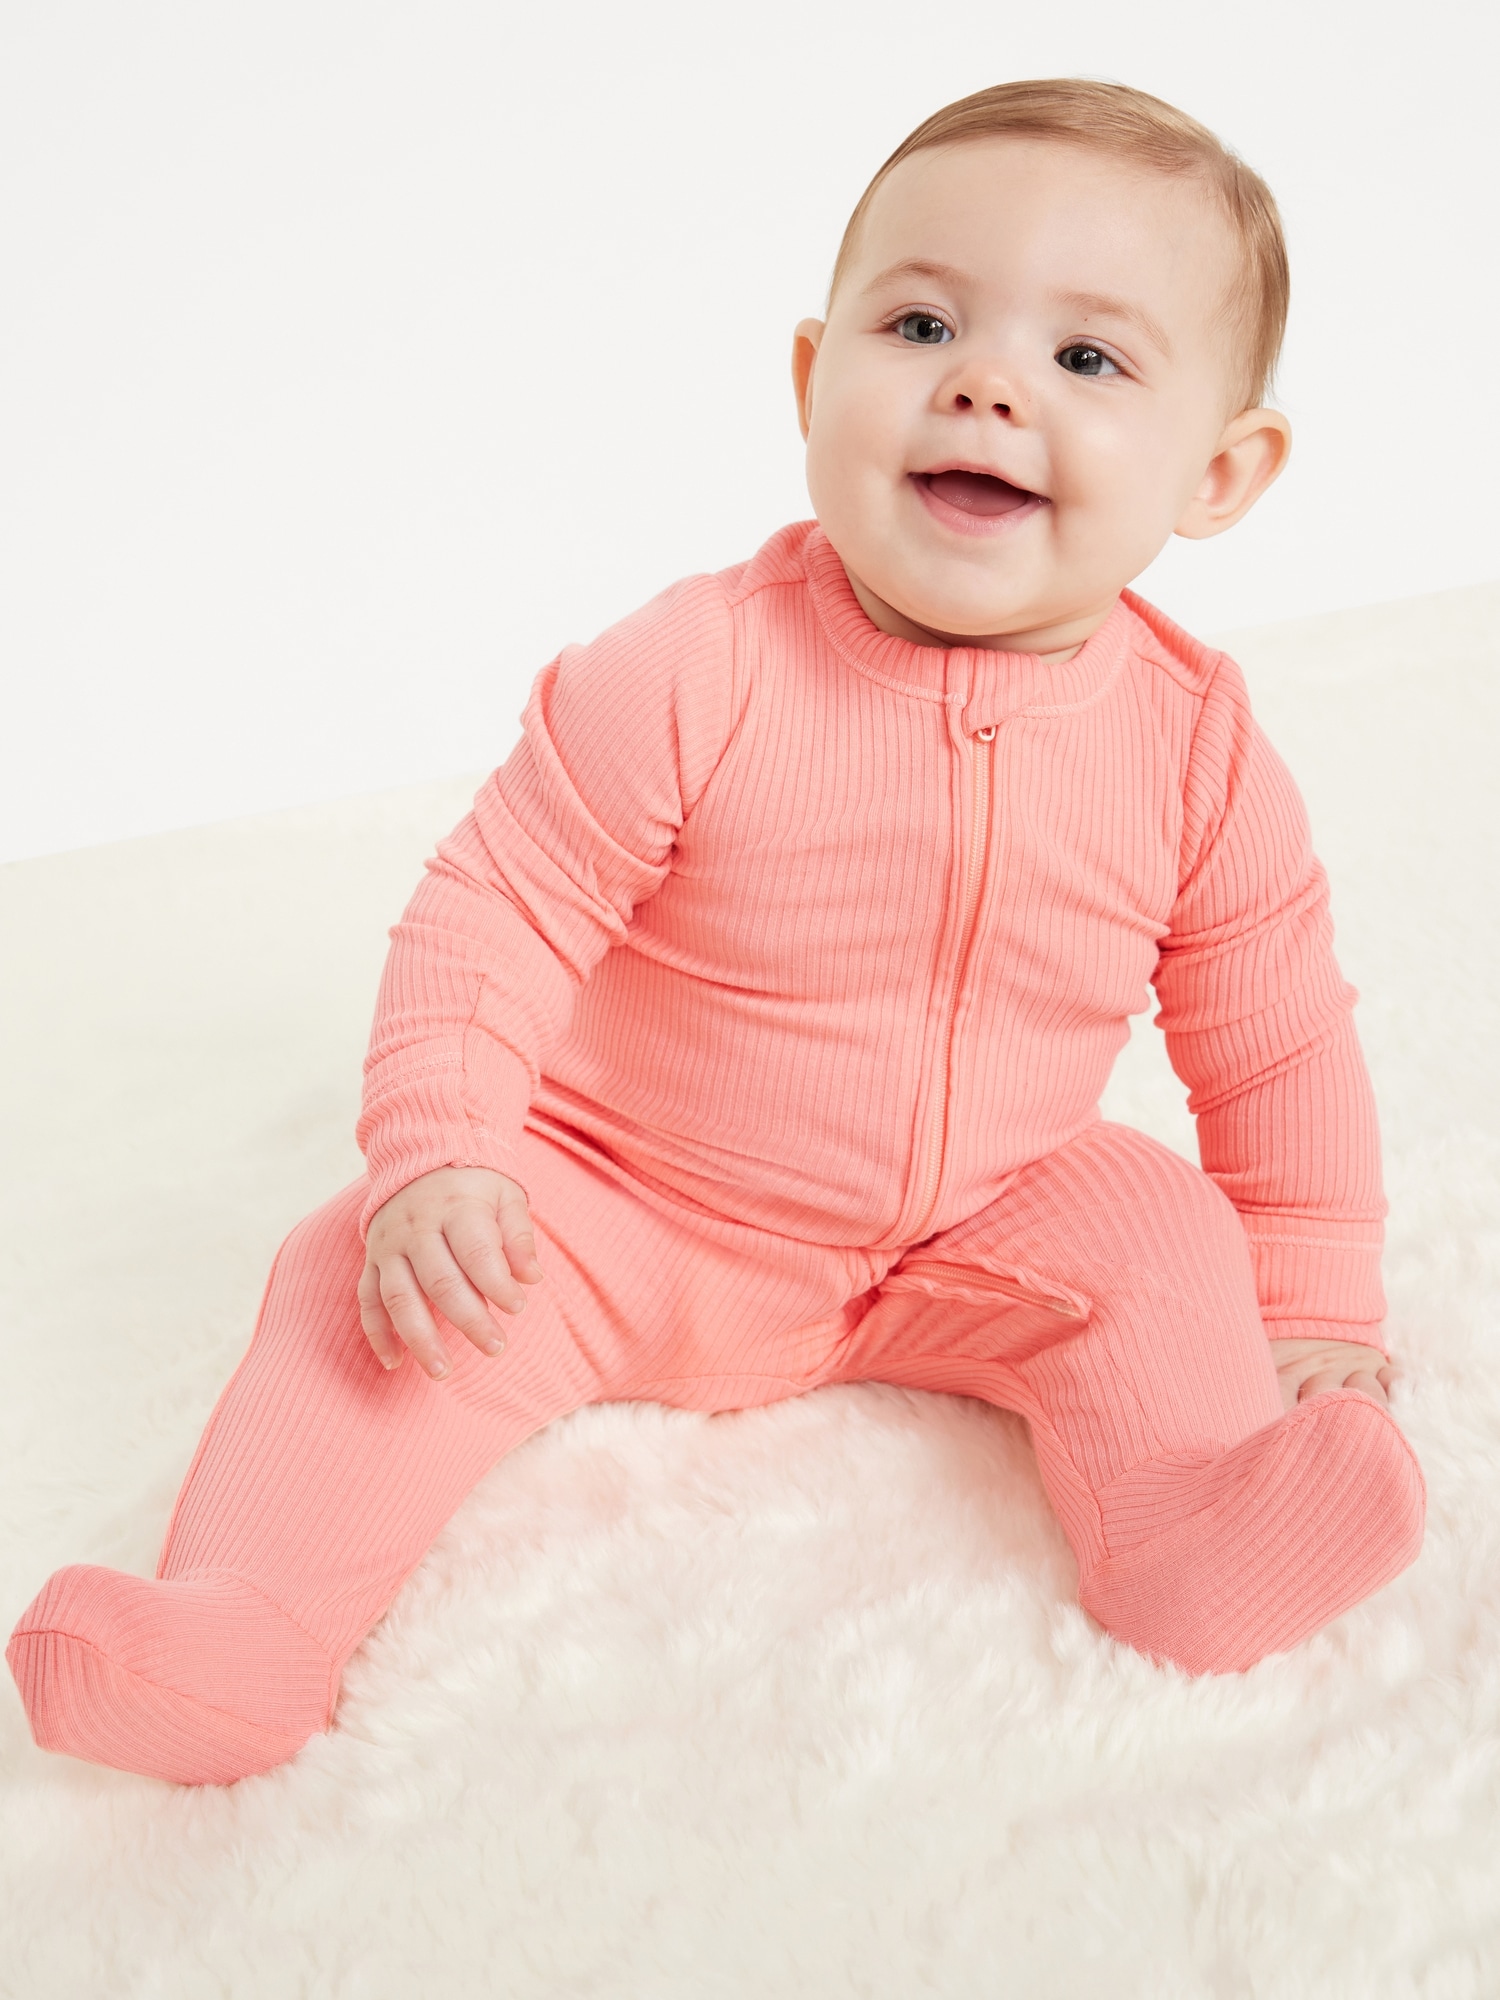 Unisex 2-Way-Zip Sleep & Play Footed One-Piece for Baby | Old Navy